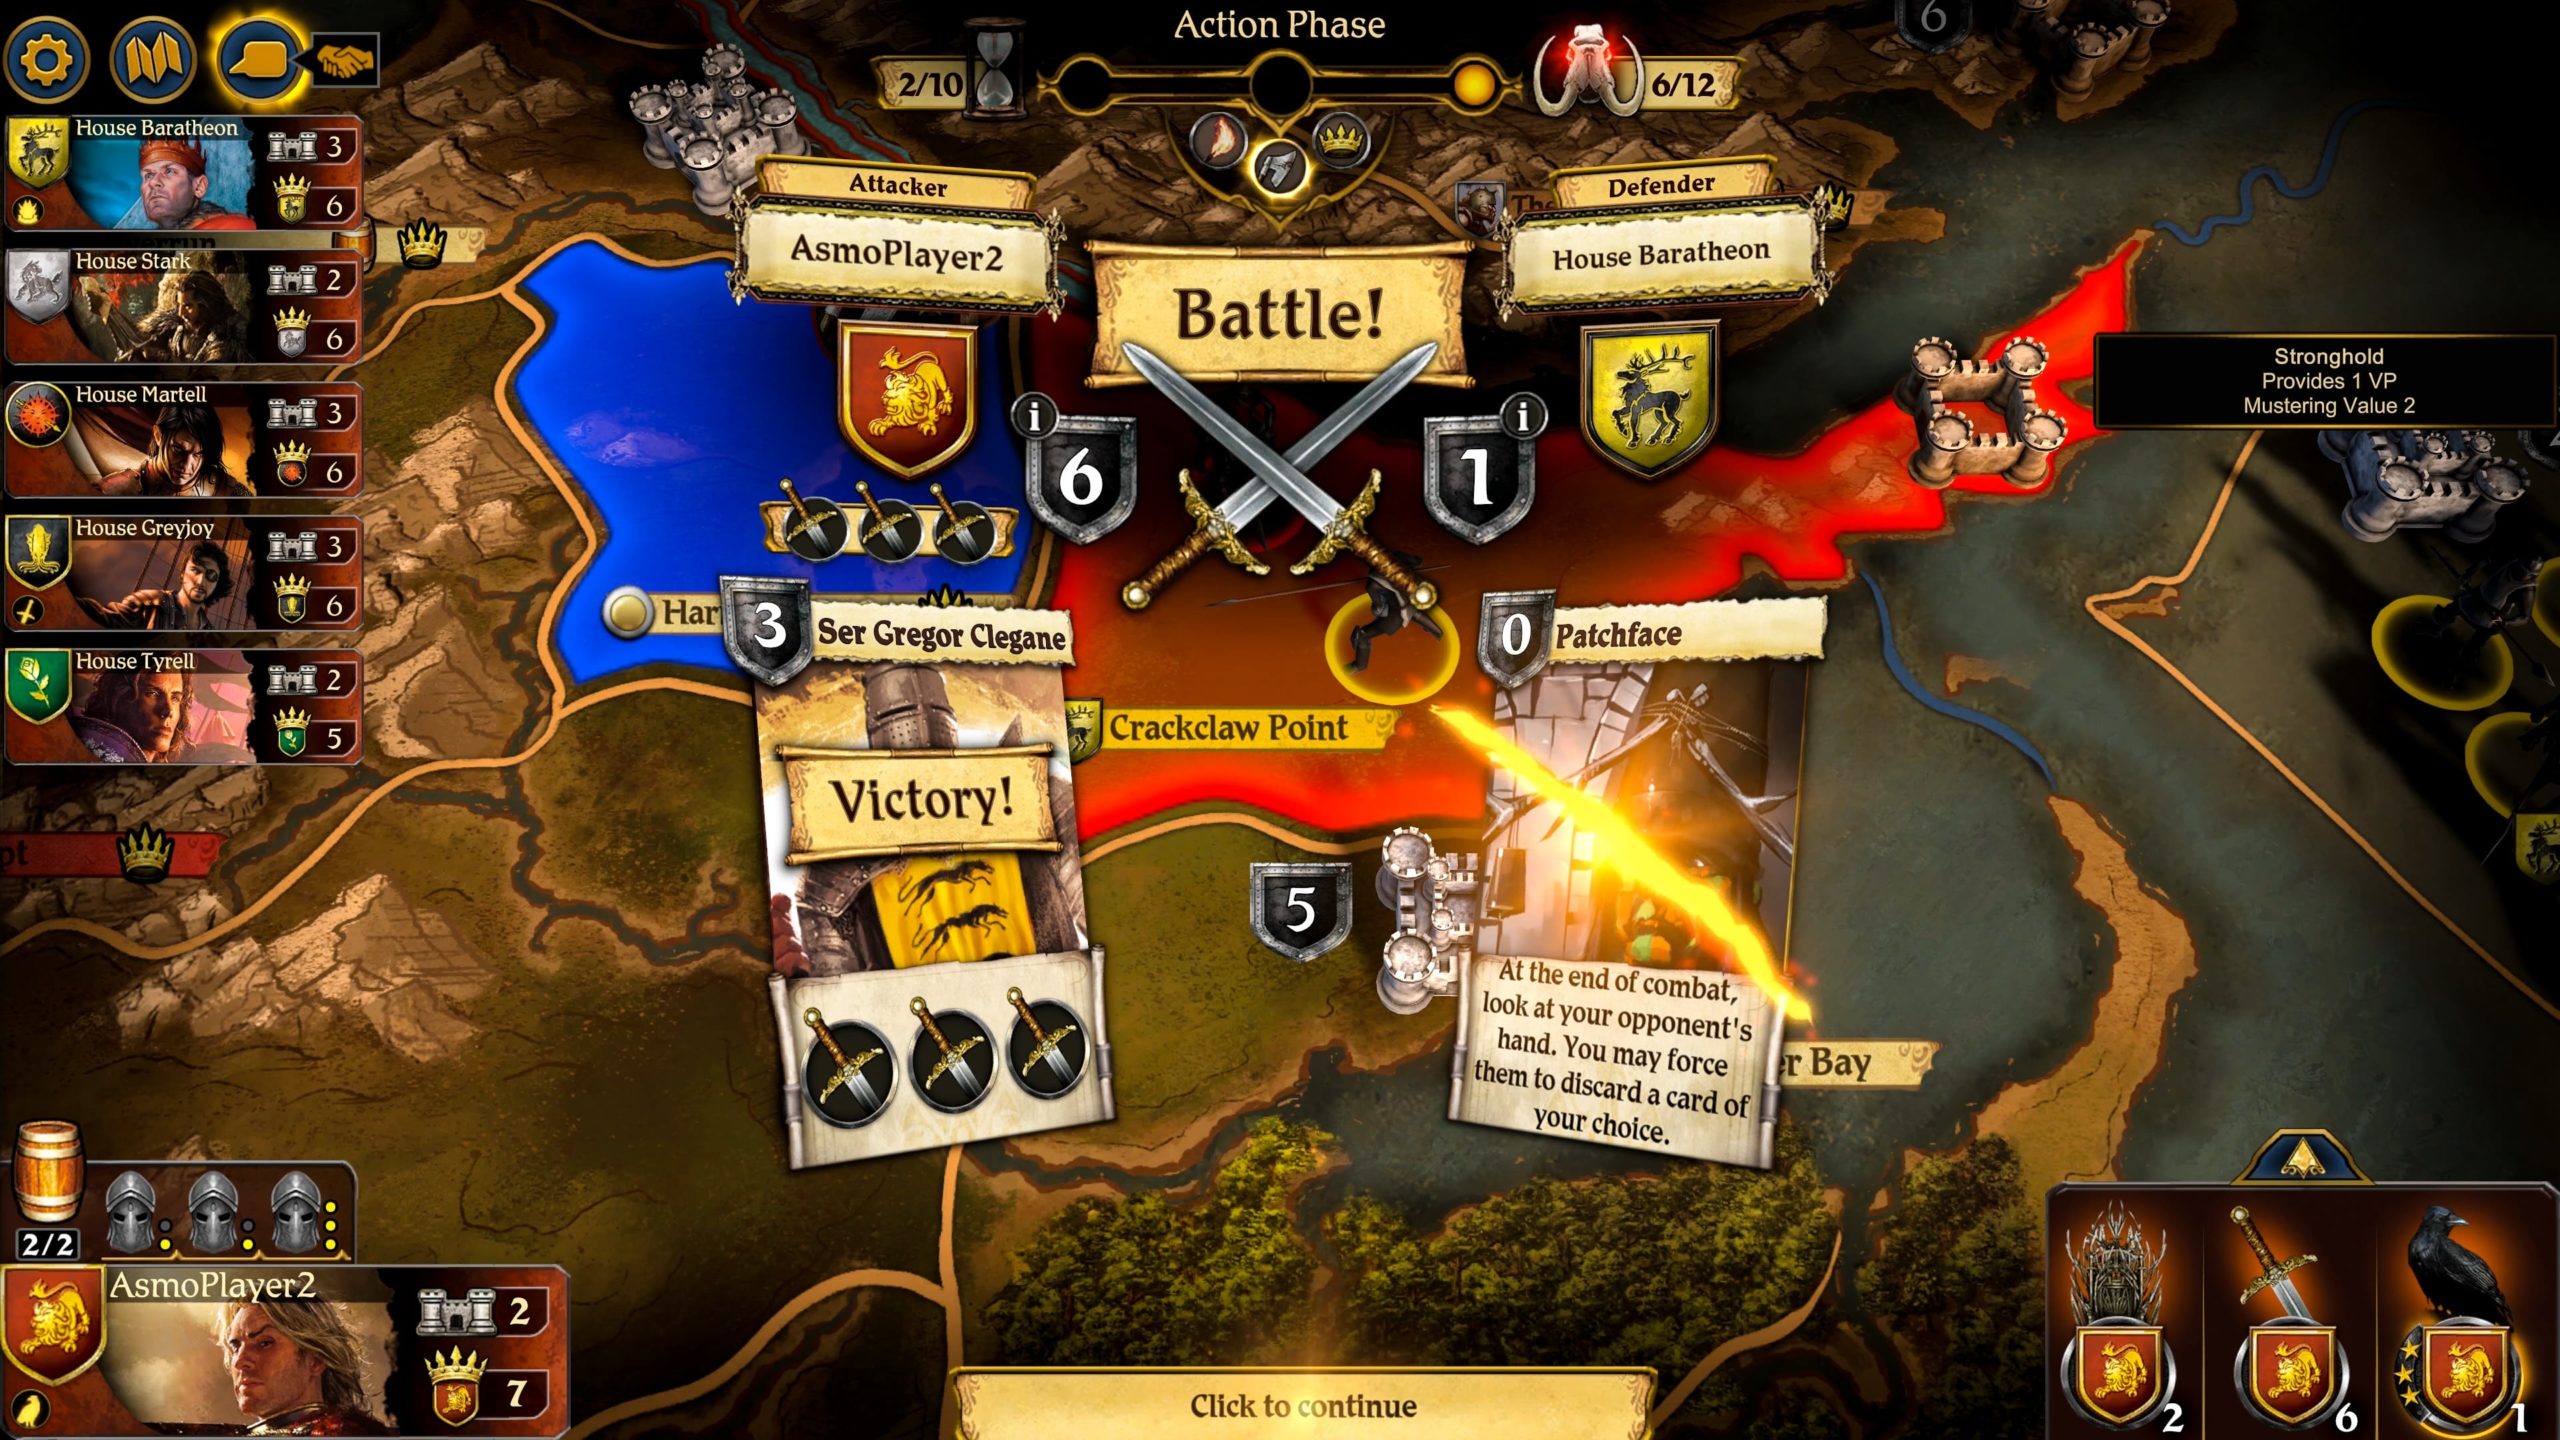 The Excellent Game Of Thrones Board Game Is Coming To PC